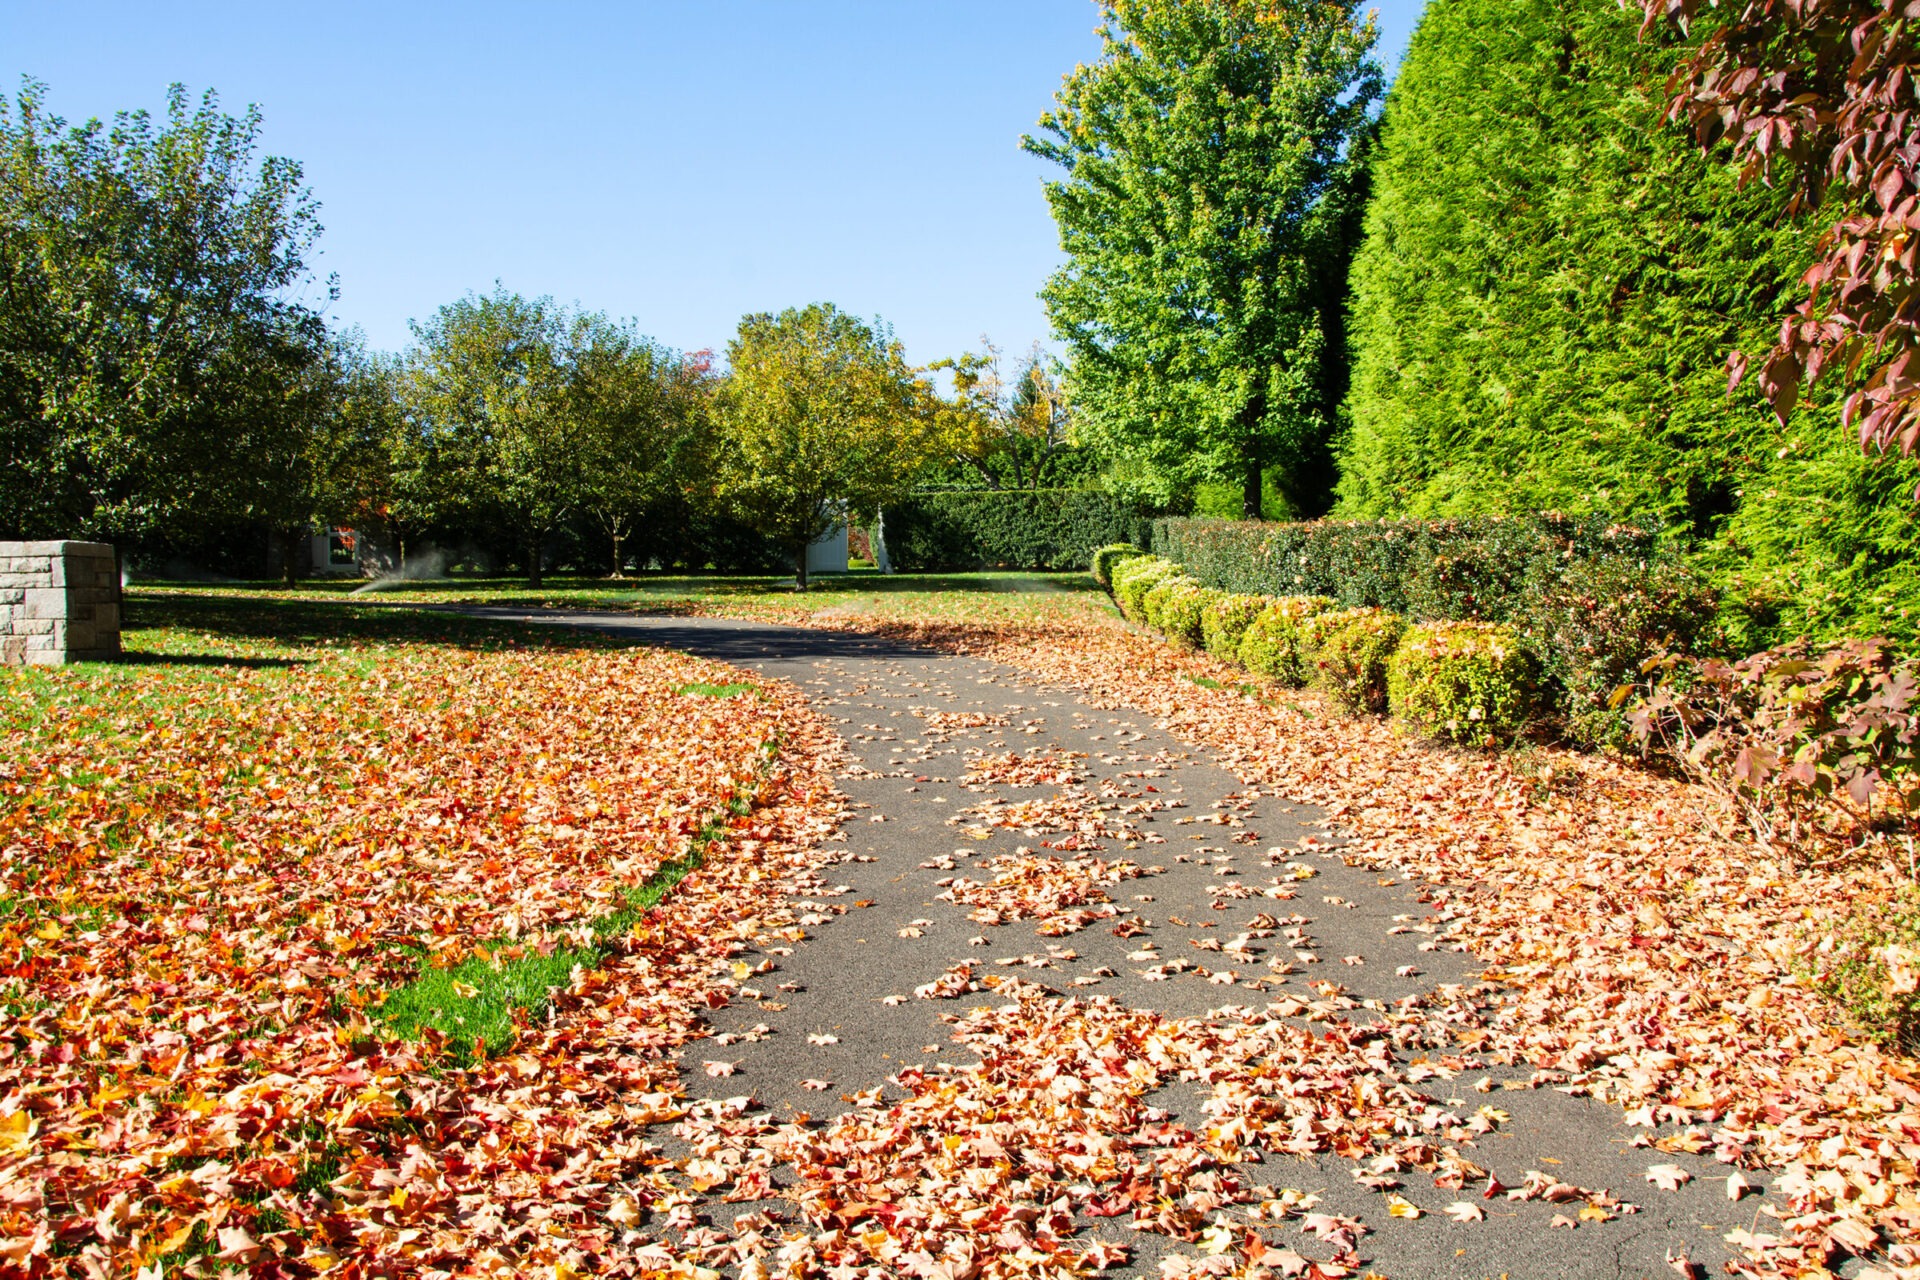 This is an autumnal scene featuring a walking path littered with fallen leaves, surrounded by trees and hedges under a clear blue sky.